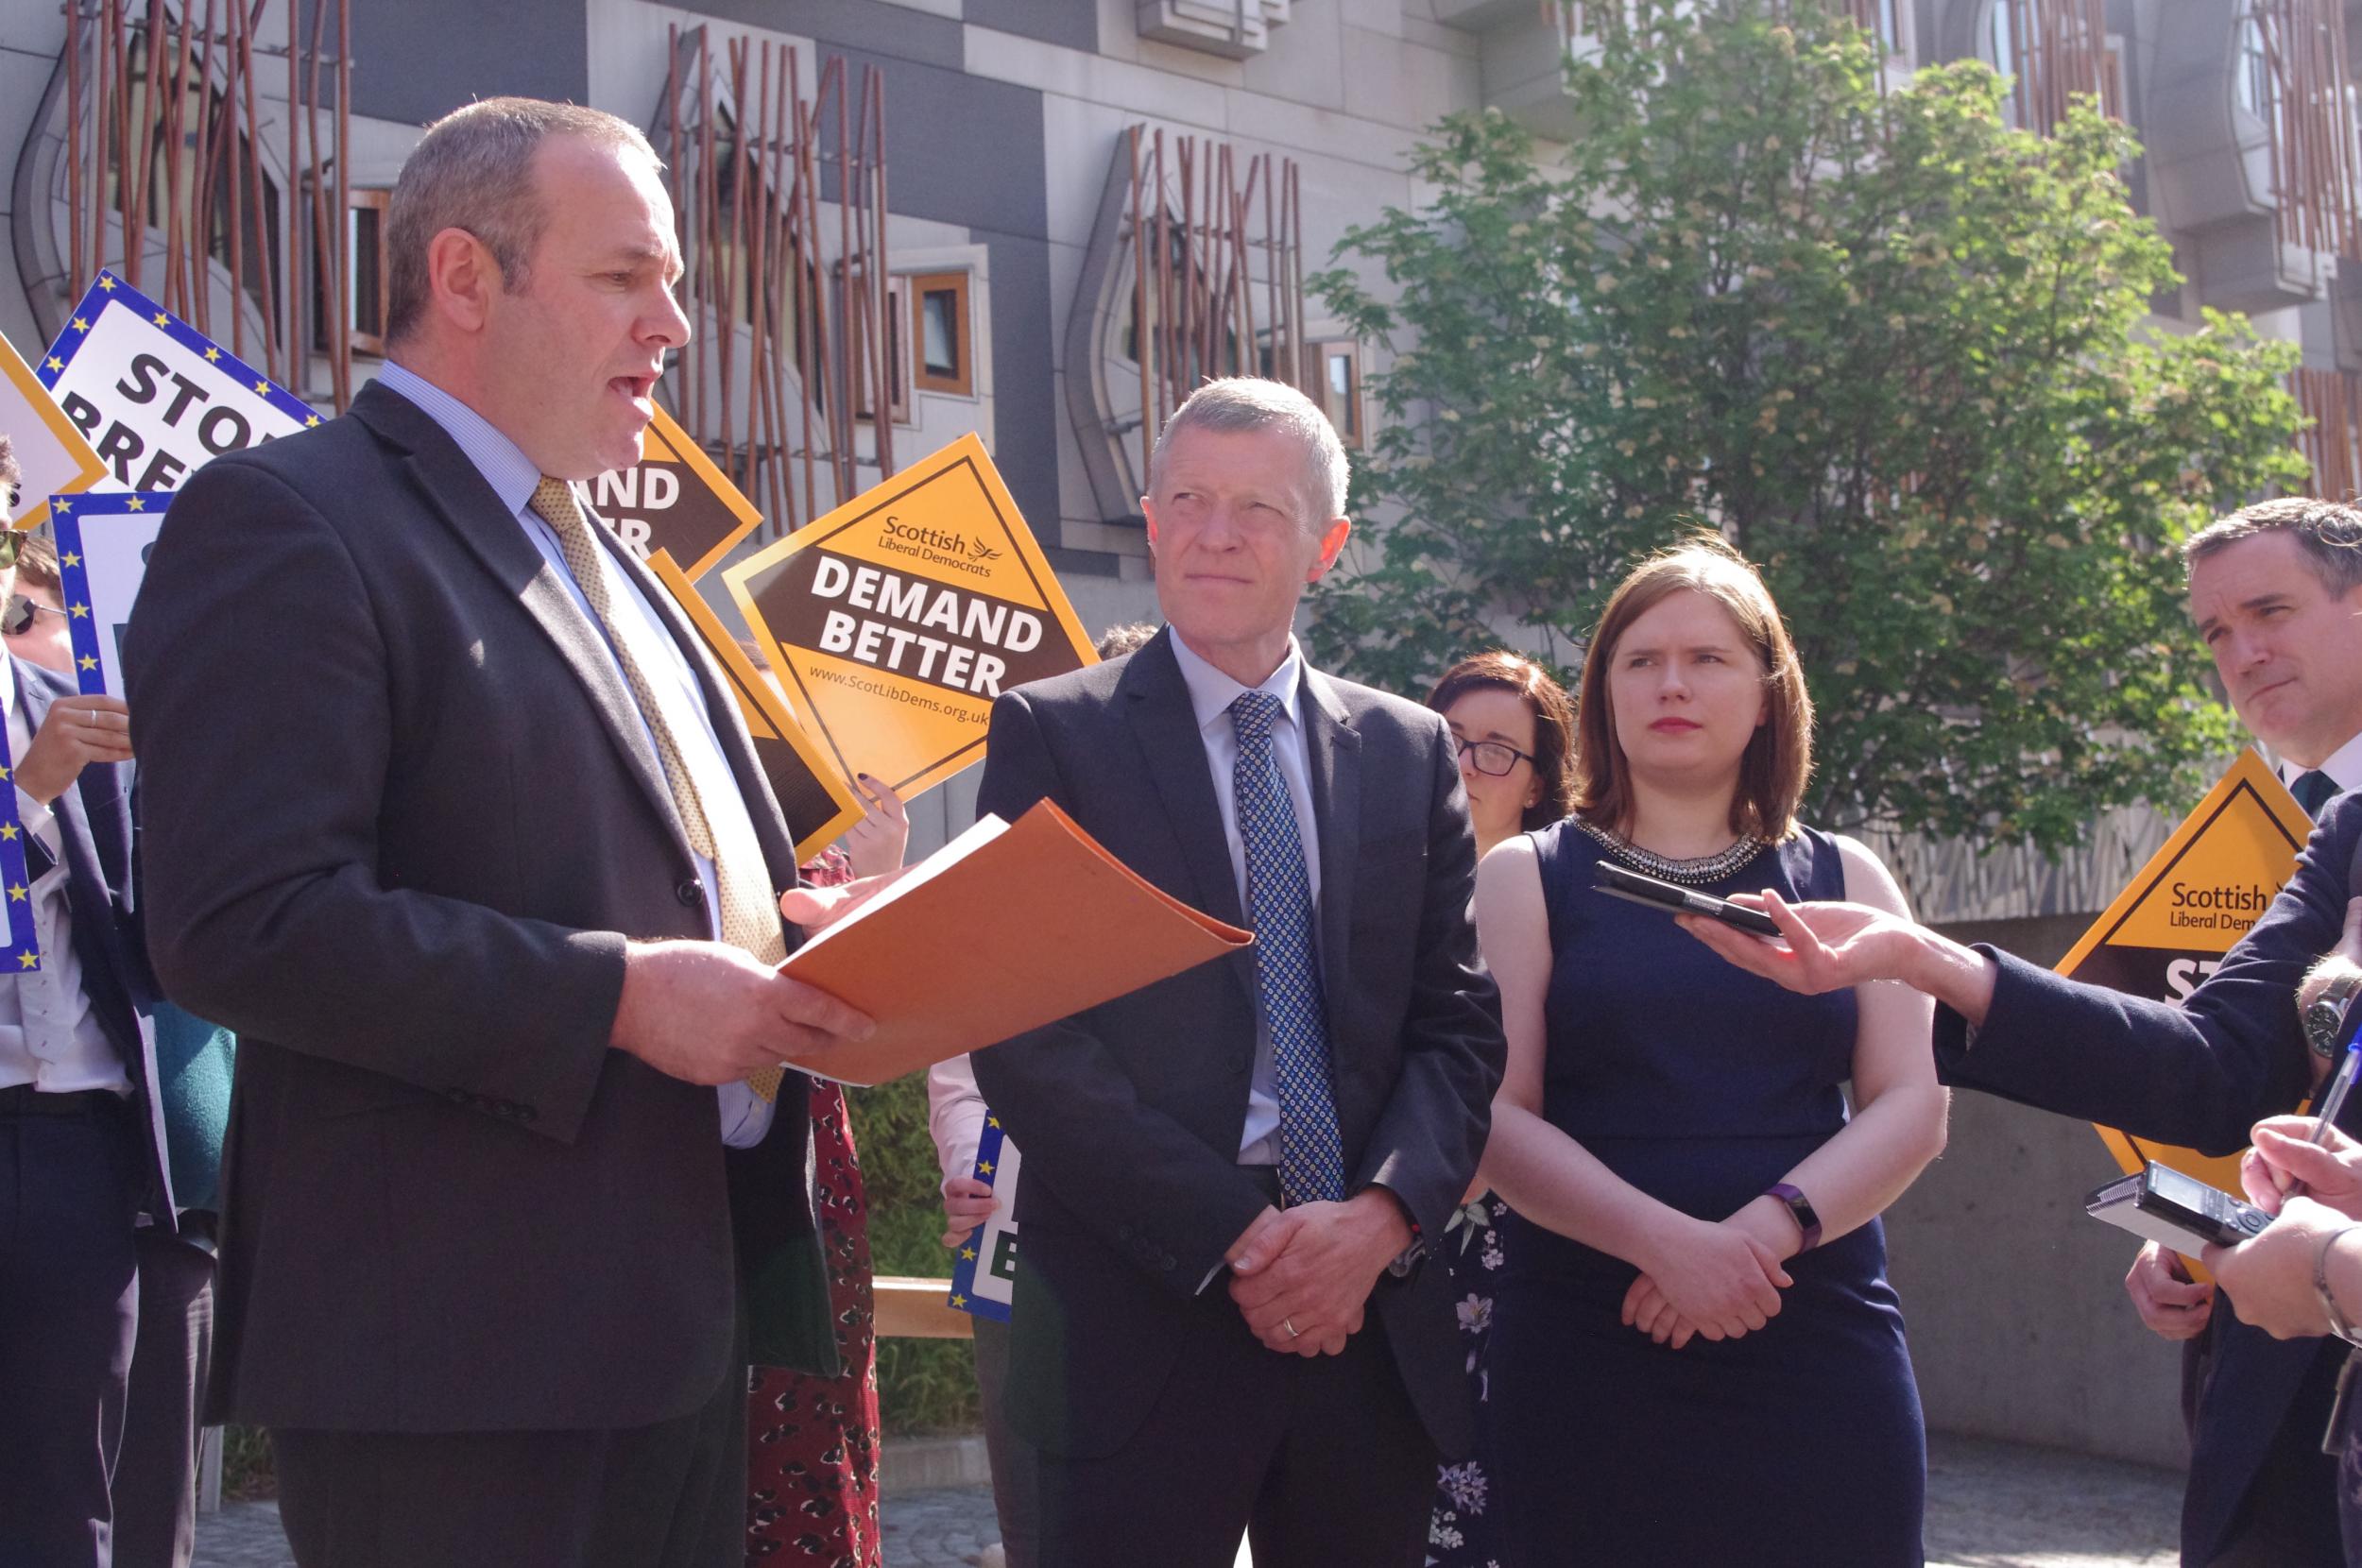 Change UK: European election candidate David Macdonald quits to support Liberal Democrats